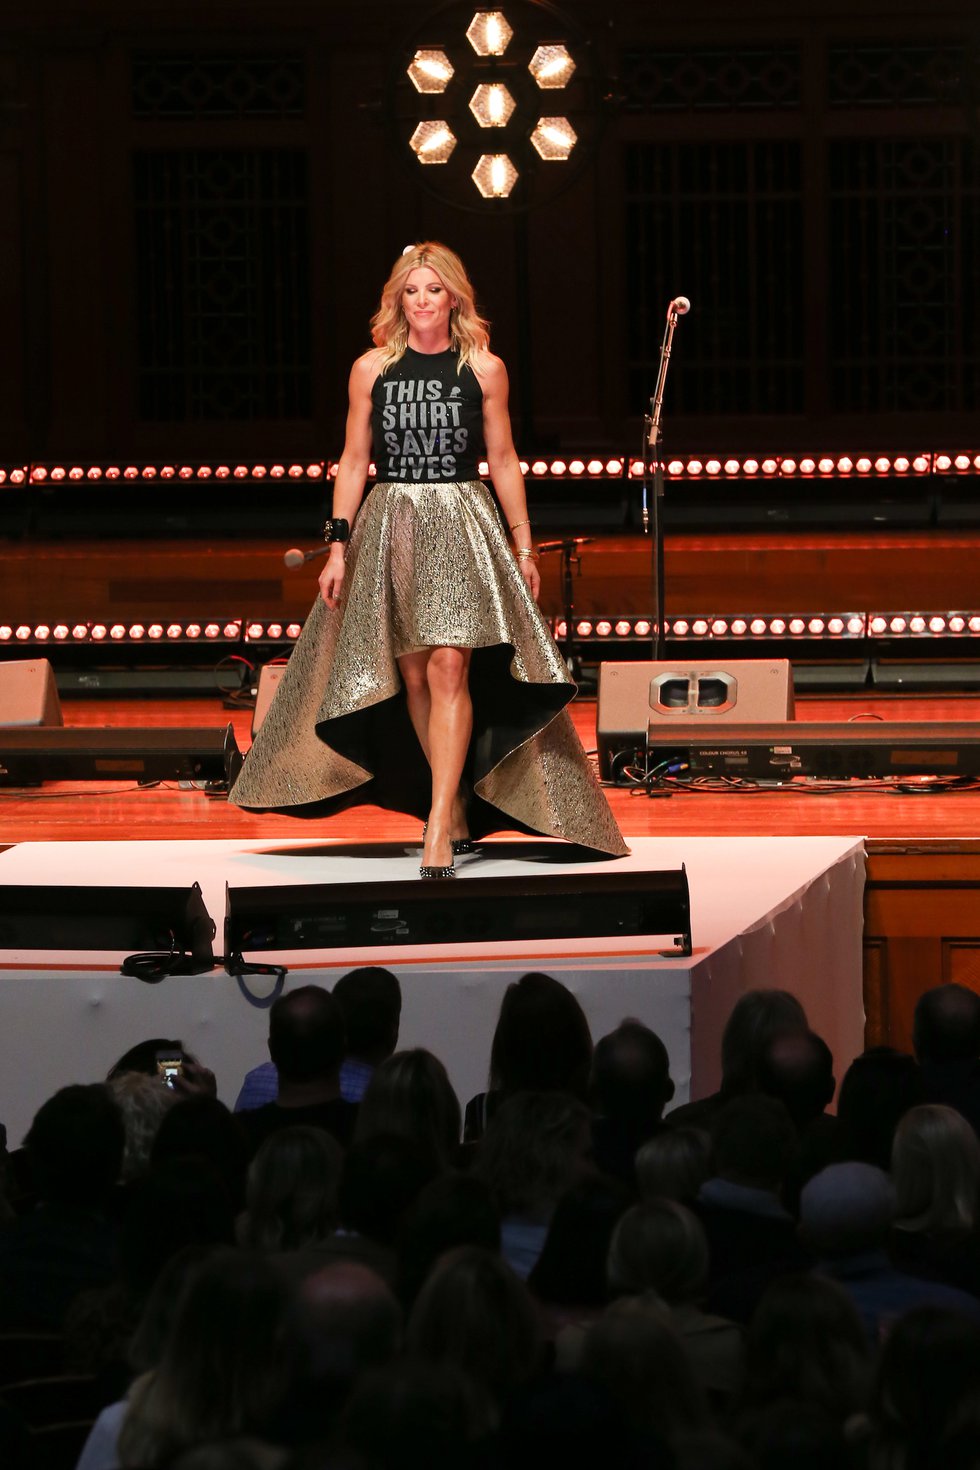 Landyn of Living with Landyn walks the runway at the #ThisShirtSavesLives launch.jpg